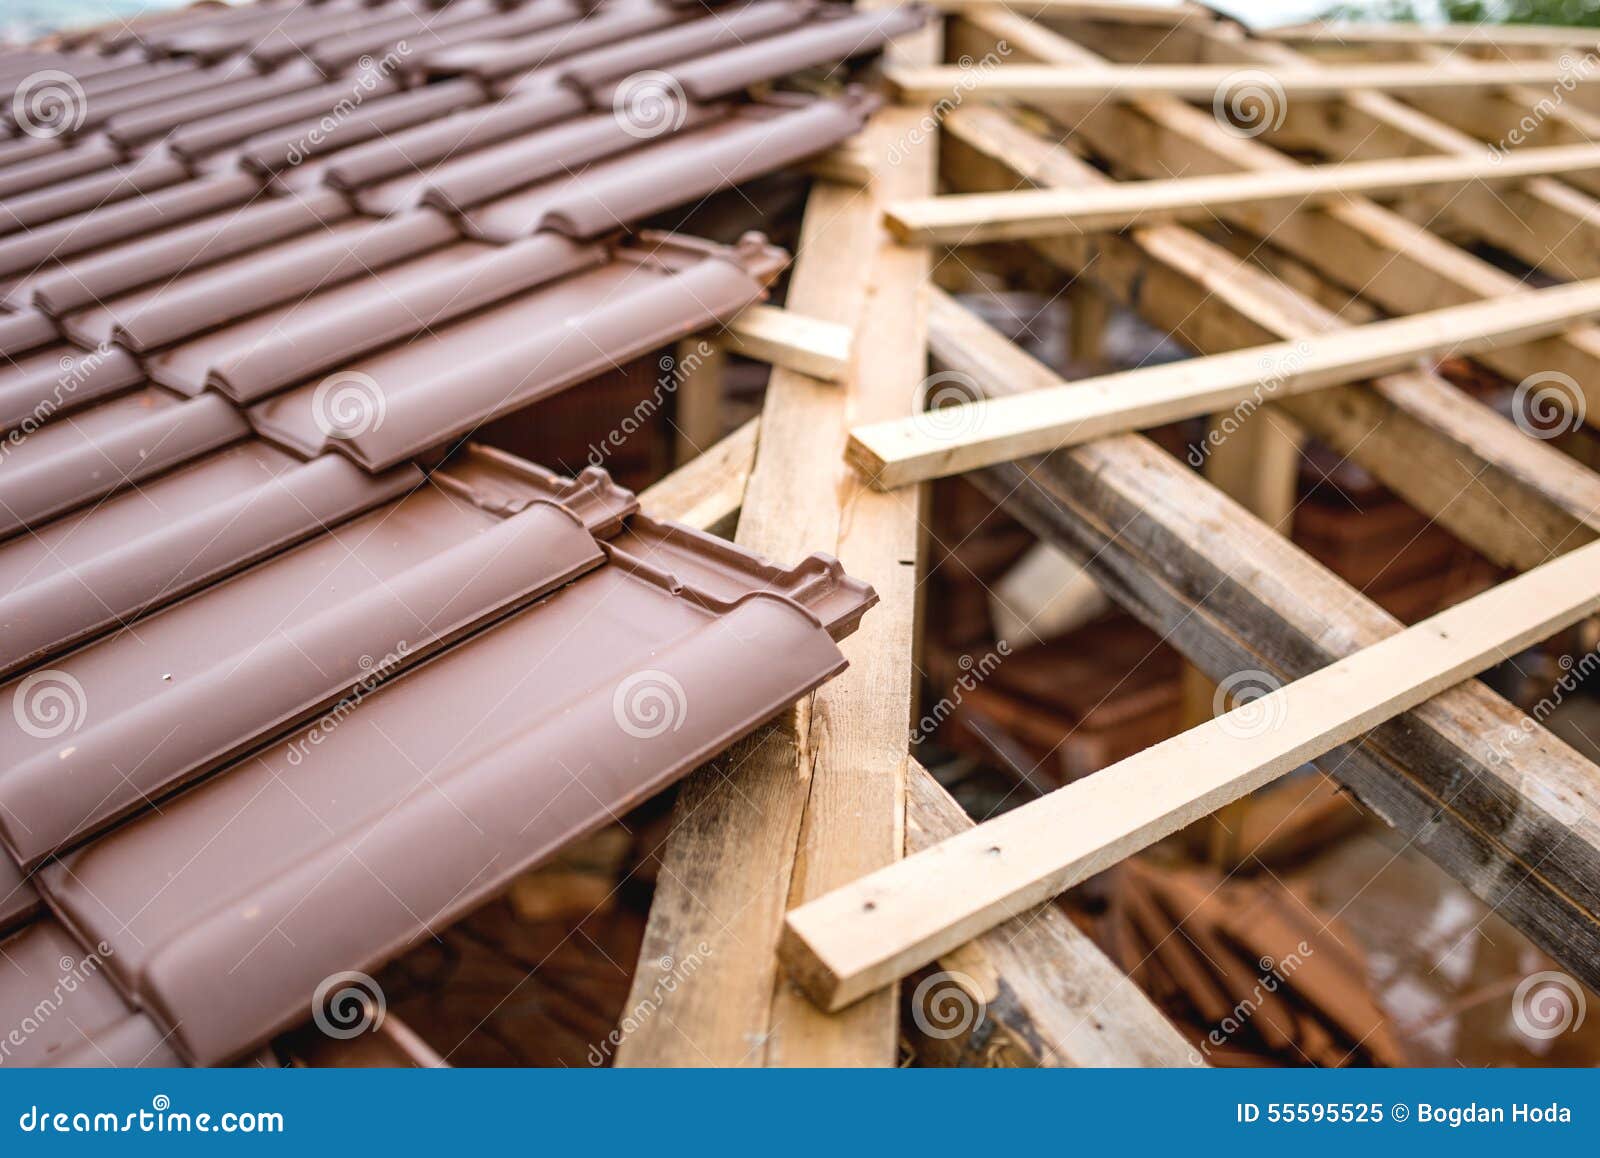 symmetric distribution of roof tiles on new house construction site